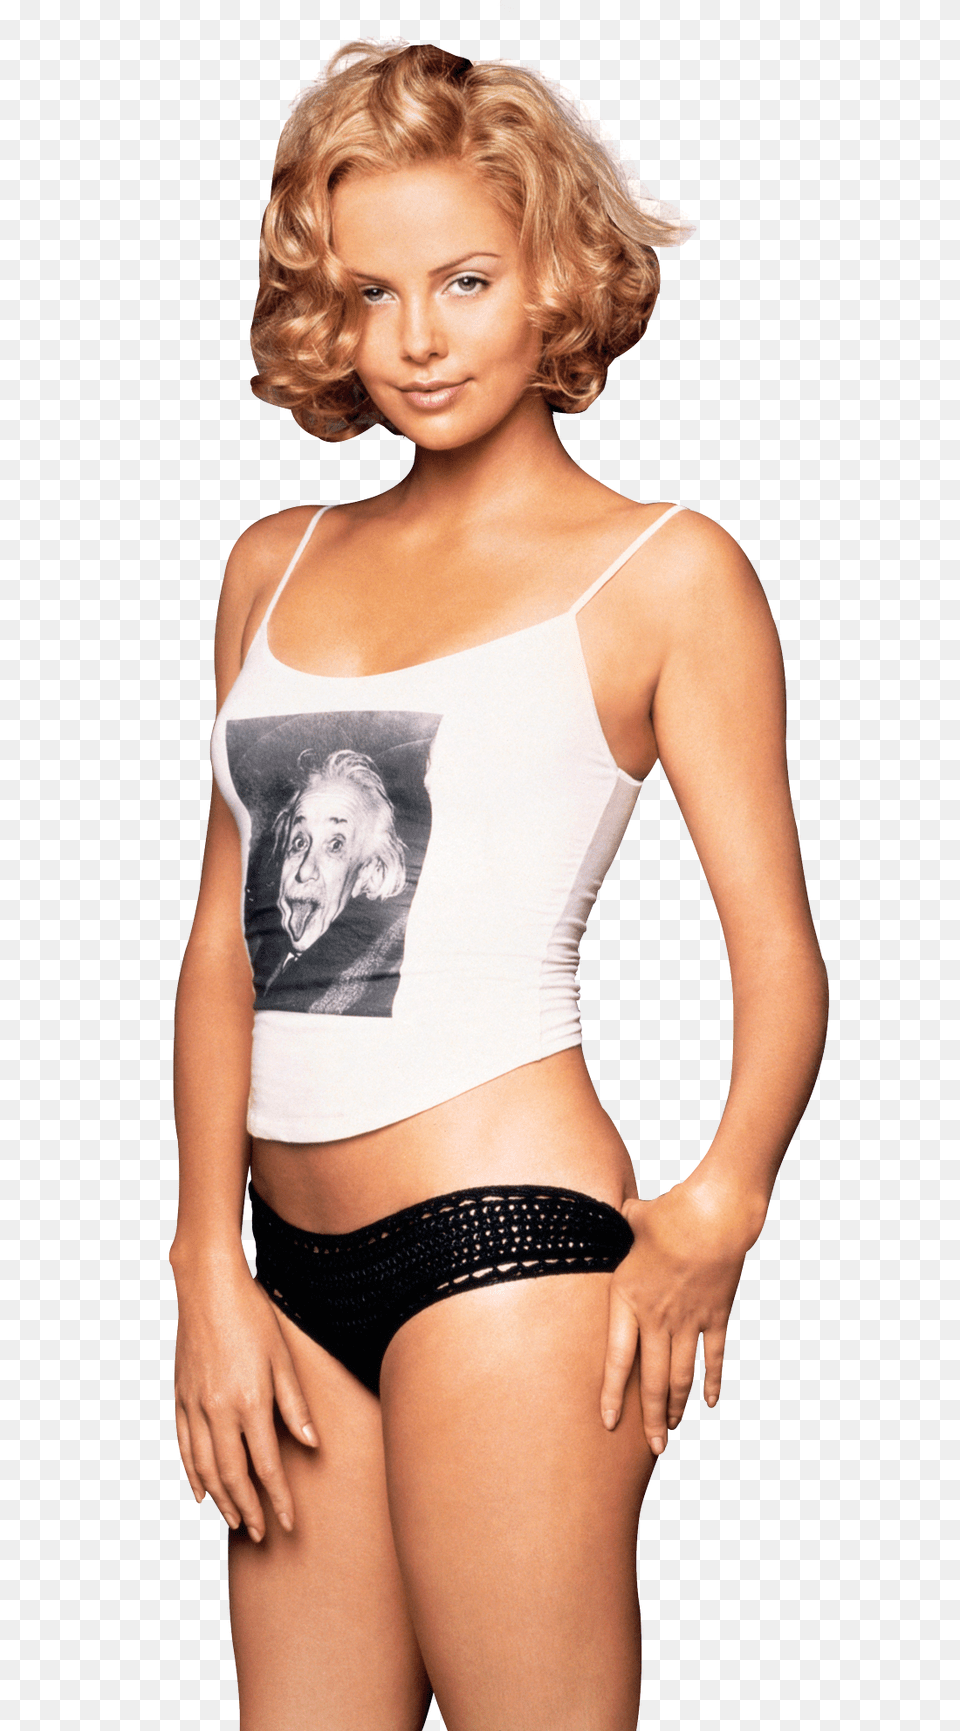 Pngpix Com Charlize Theron Transparent Image, Underwear, Clothing, Swimwear, Lingerie Free Png